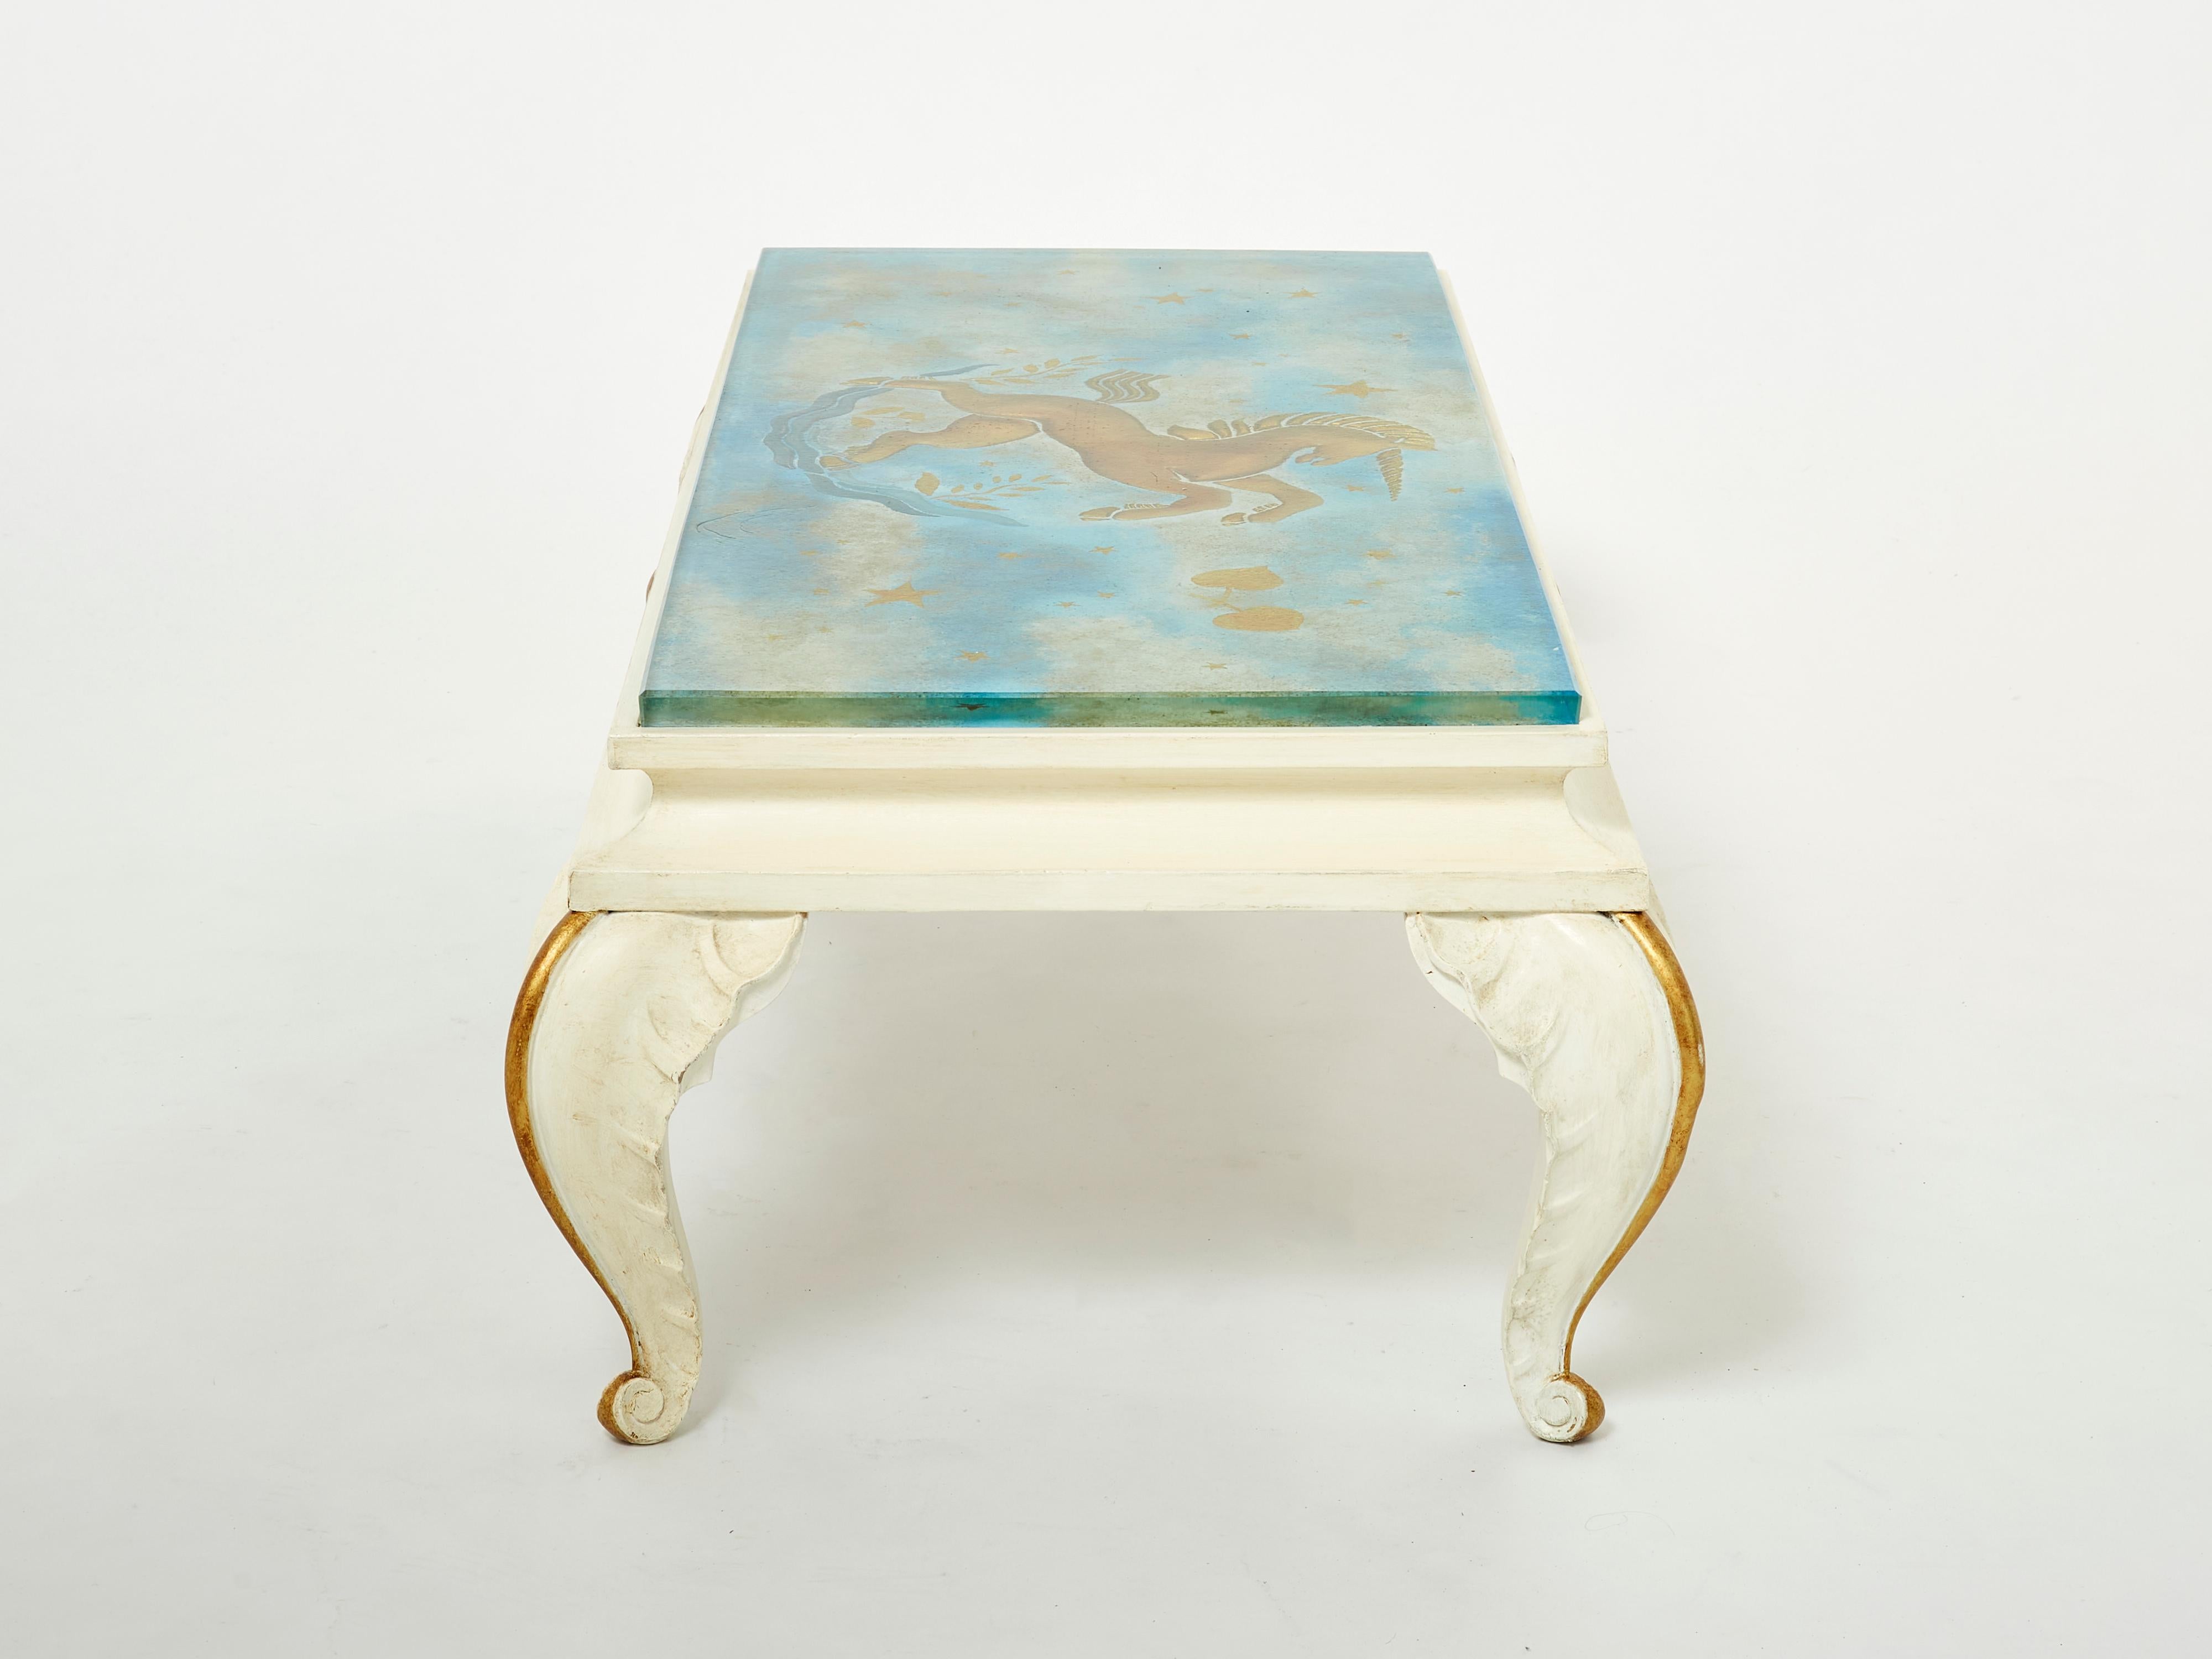 Maison Jansen Gilded Wood Painted Glass Top Coffee Table, 1950 For Sale 2